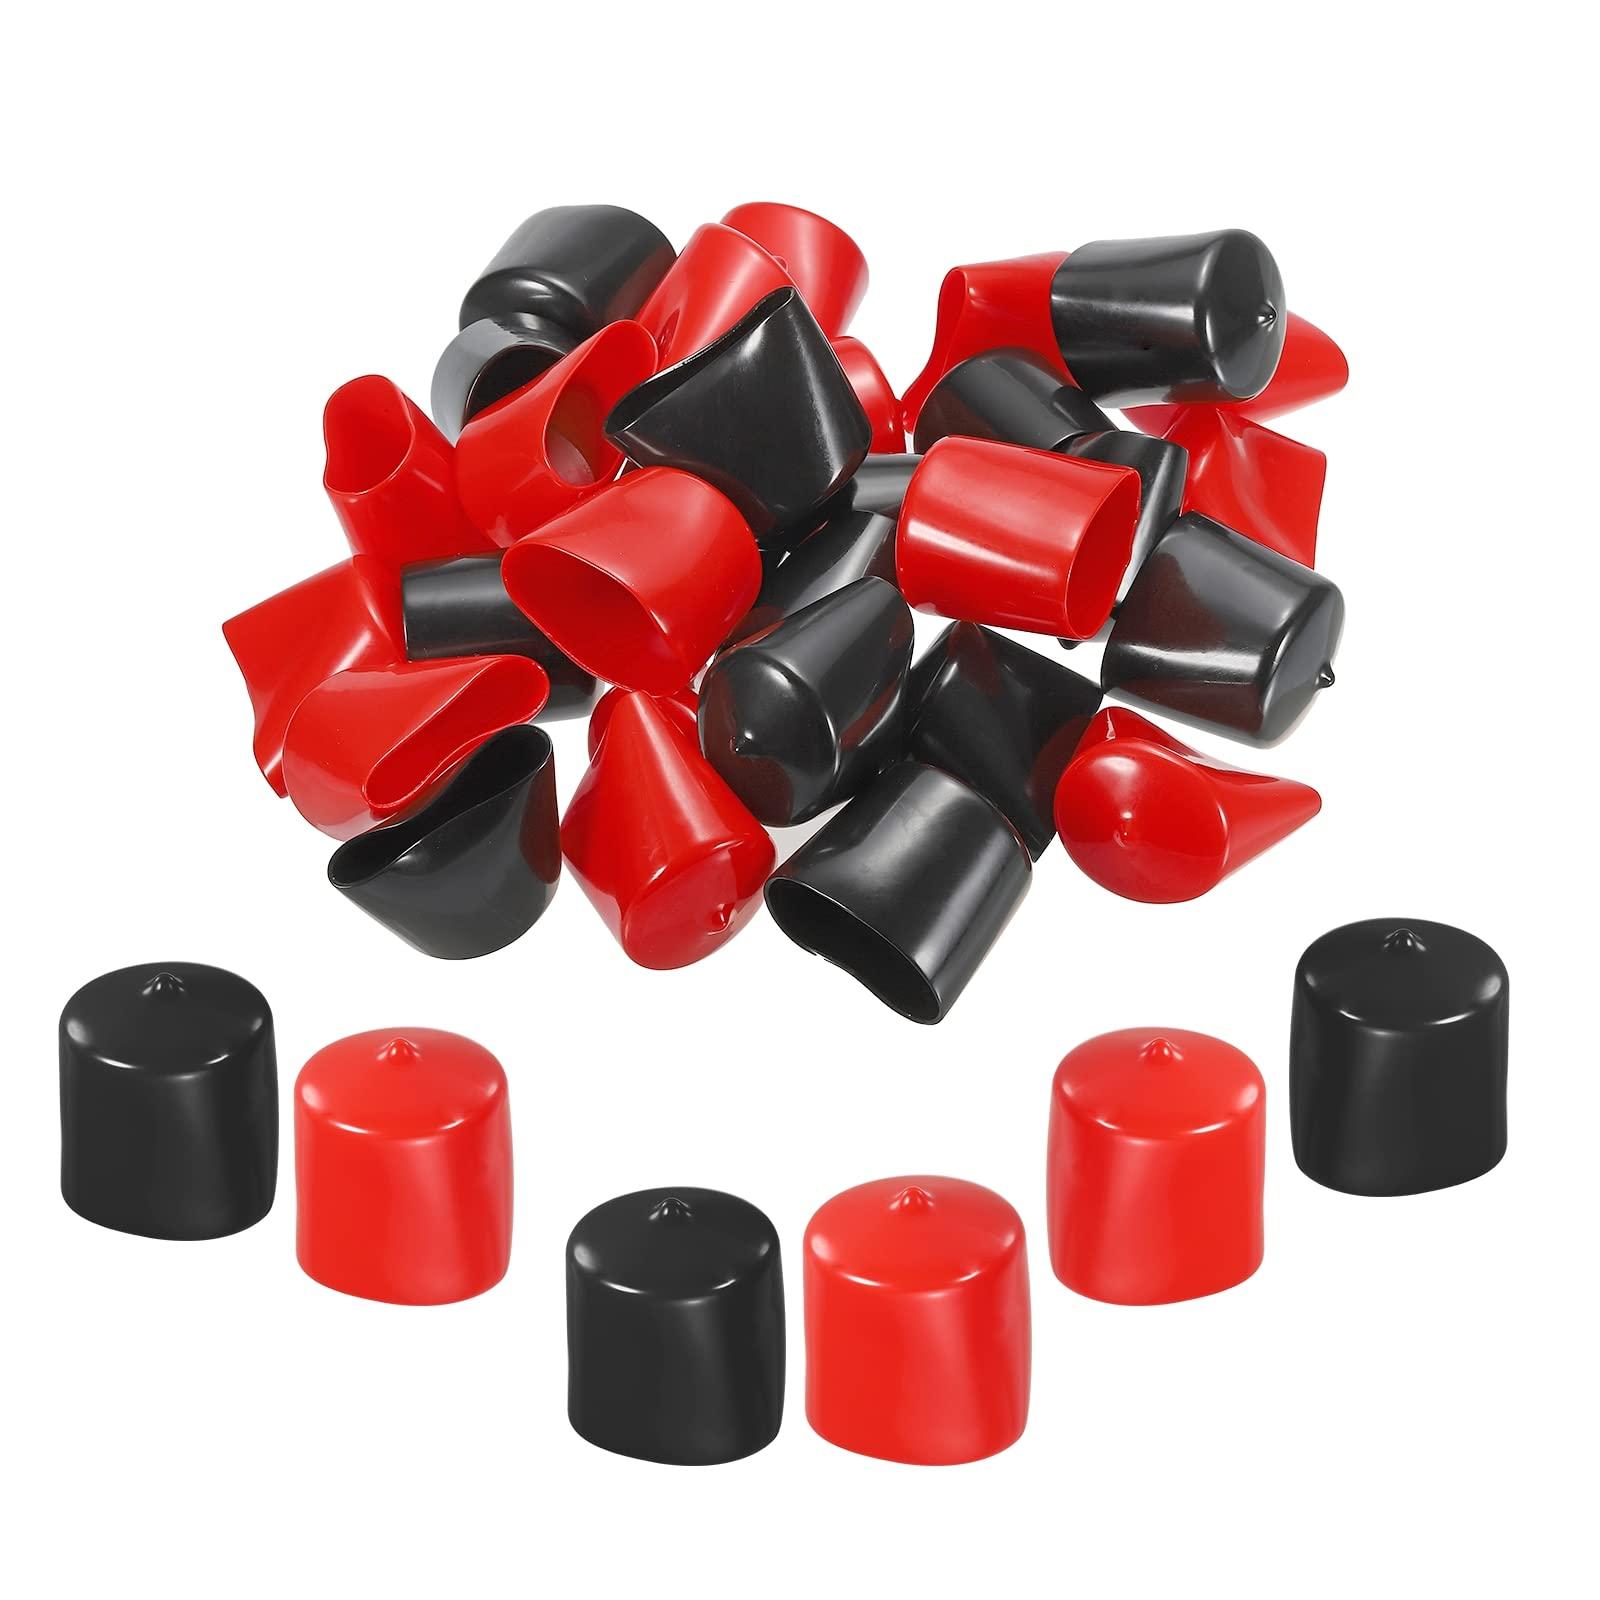 sourcing map 30pcs Rubber End Caps Cover Assortment 38mm(1 1/2 inch) PVC Vinyl Screw Thread Protector for Screw Bolt Black Red